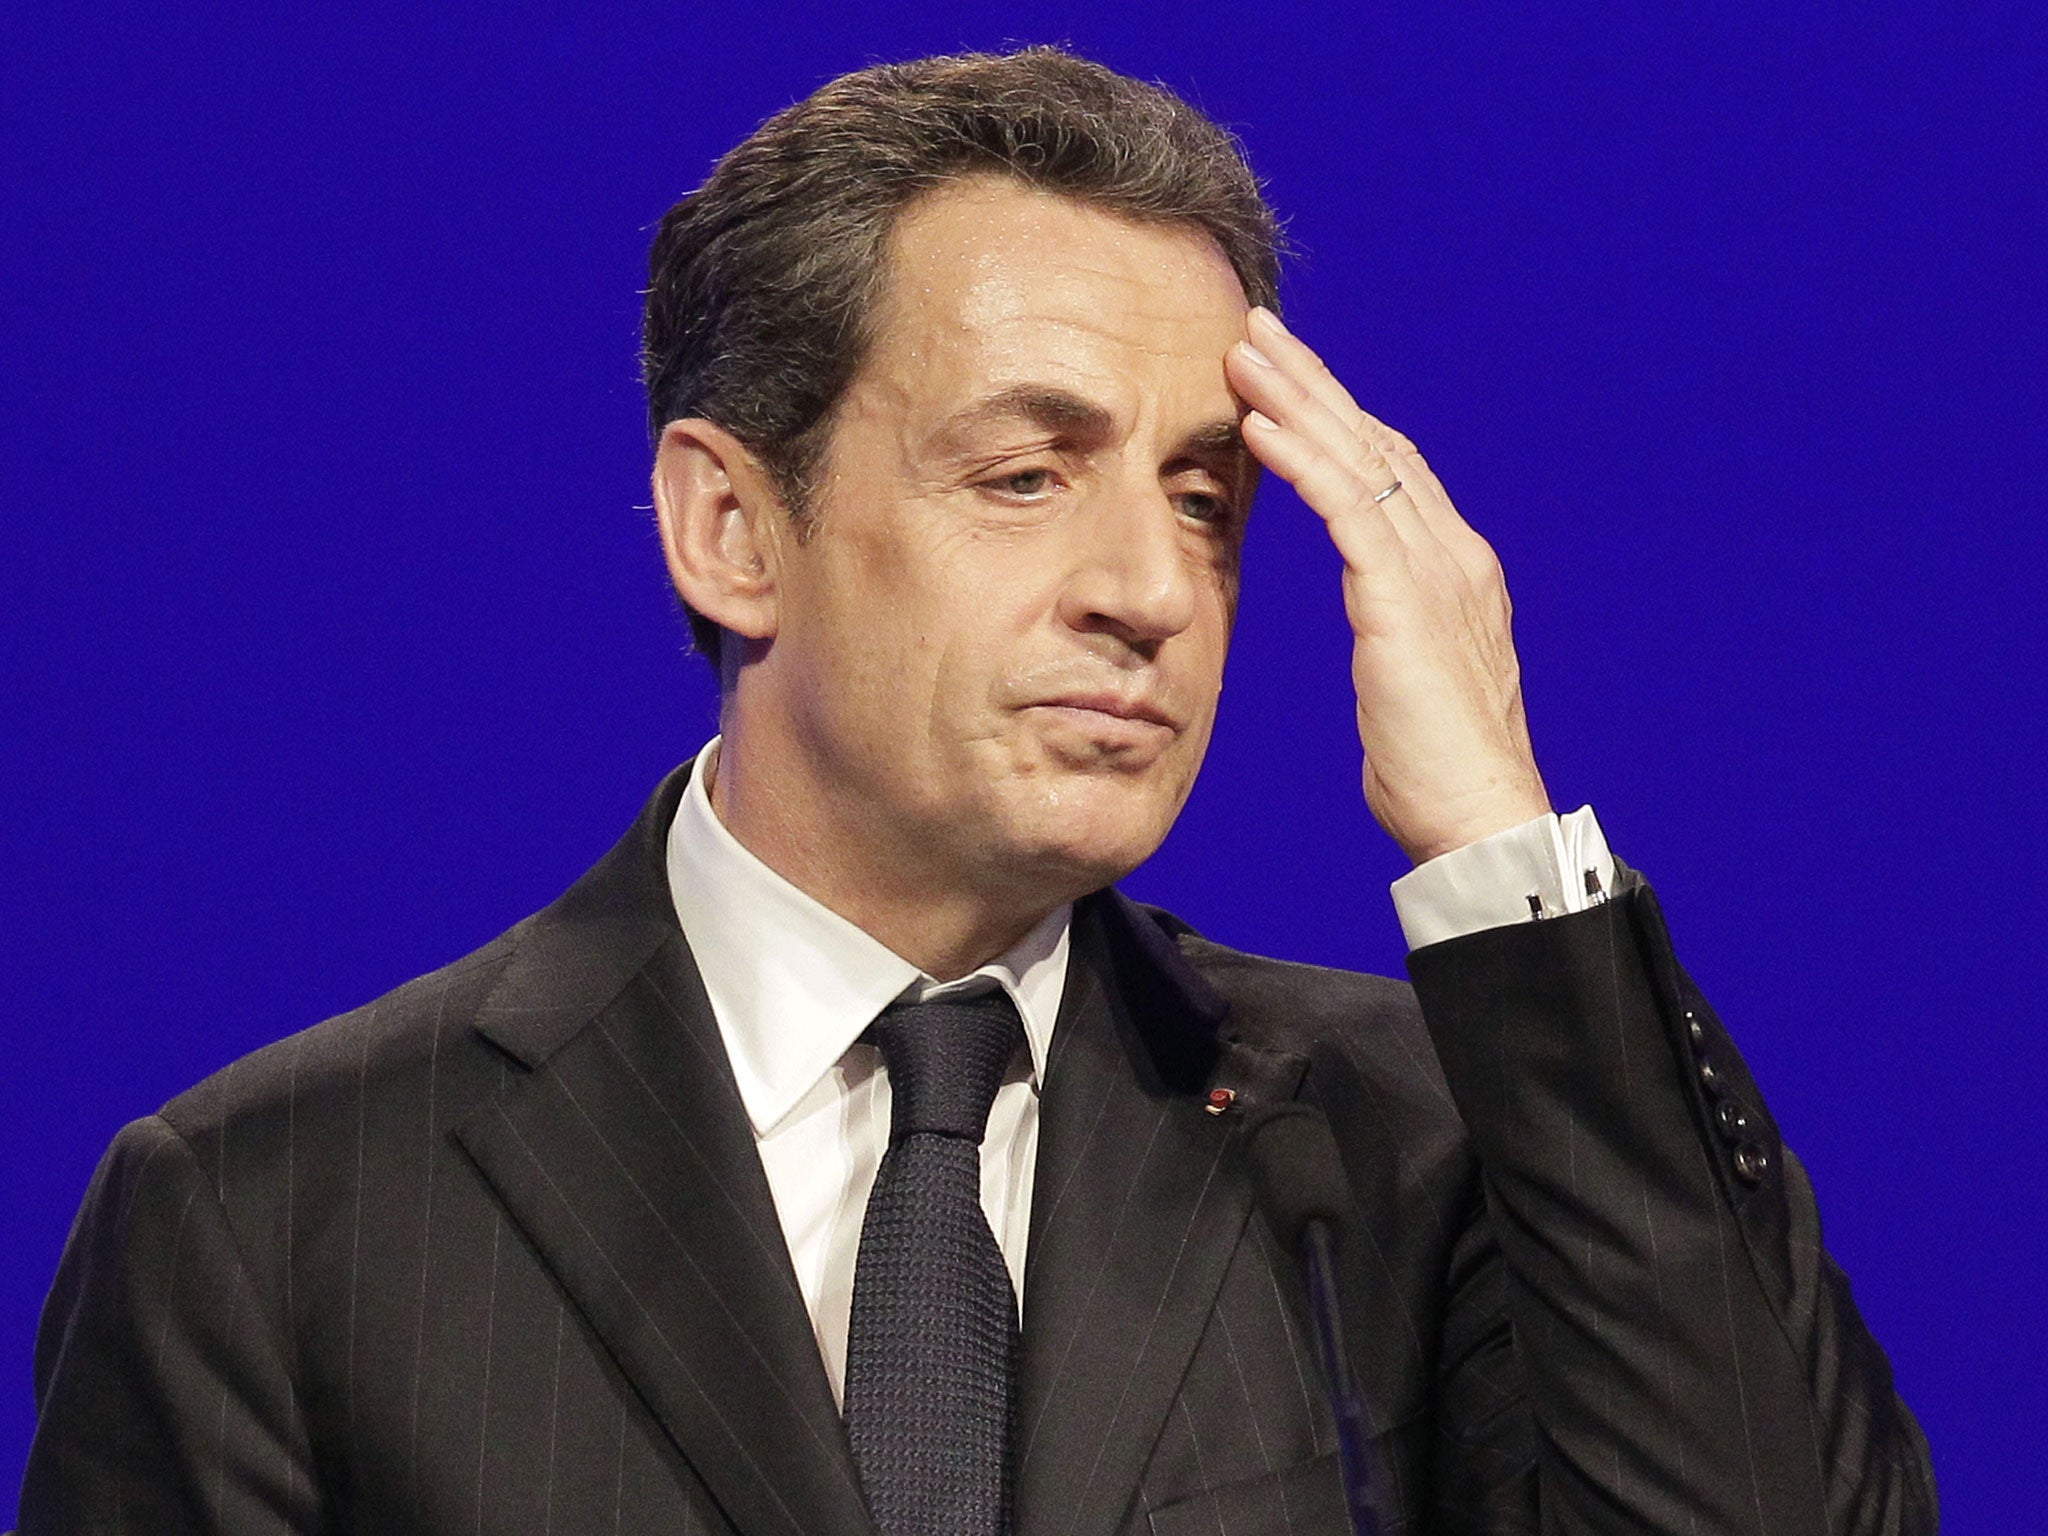 Two Labradors and a Chihuahua belonging to Nicolas Sarkozy and Carla Bruni-Sarkozy wreaked havoc in the Élysée Palace